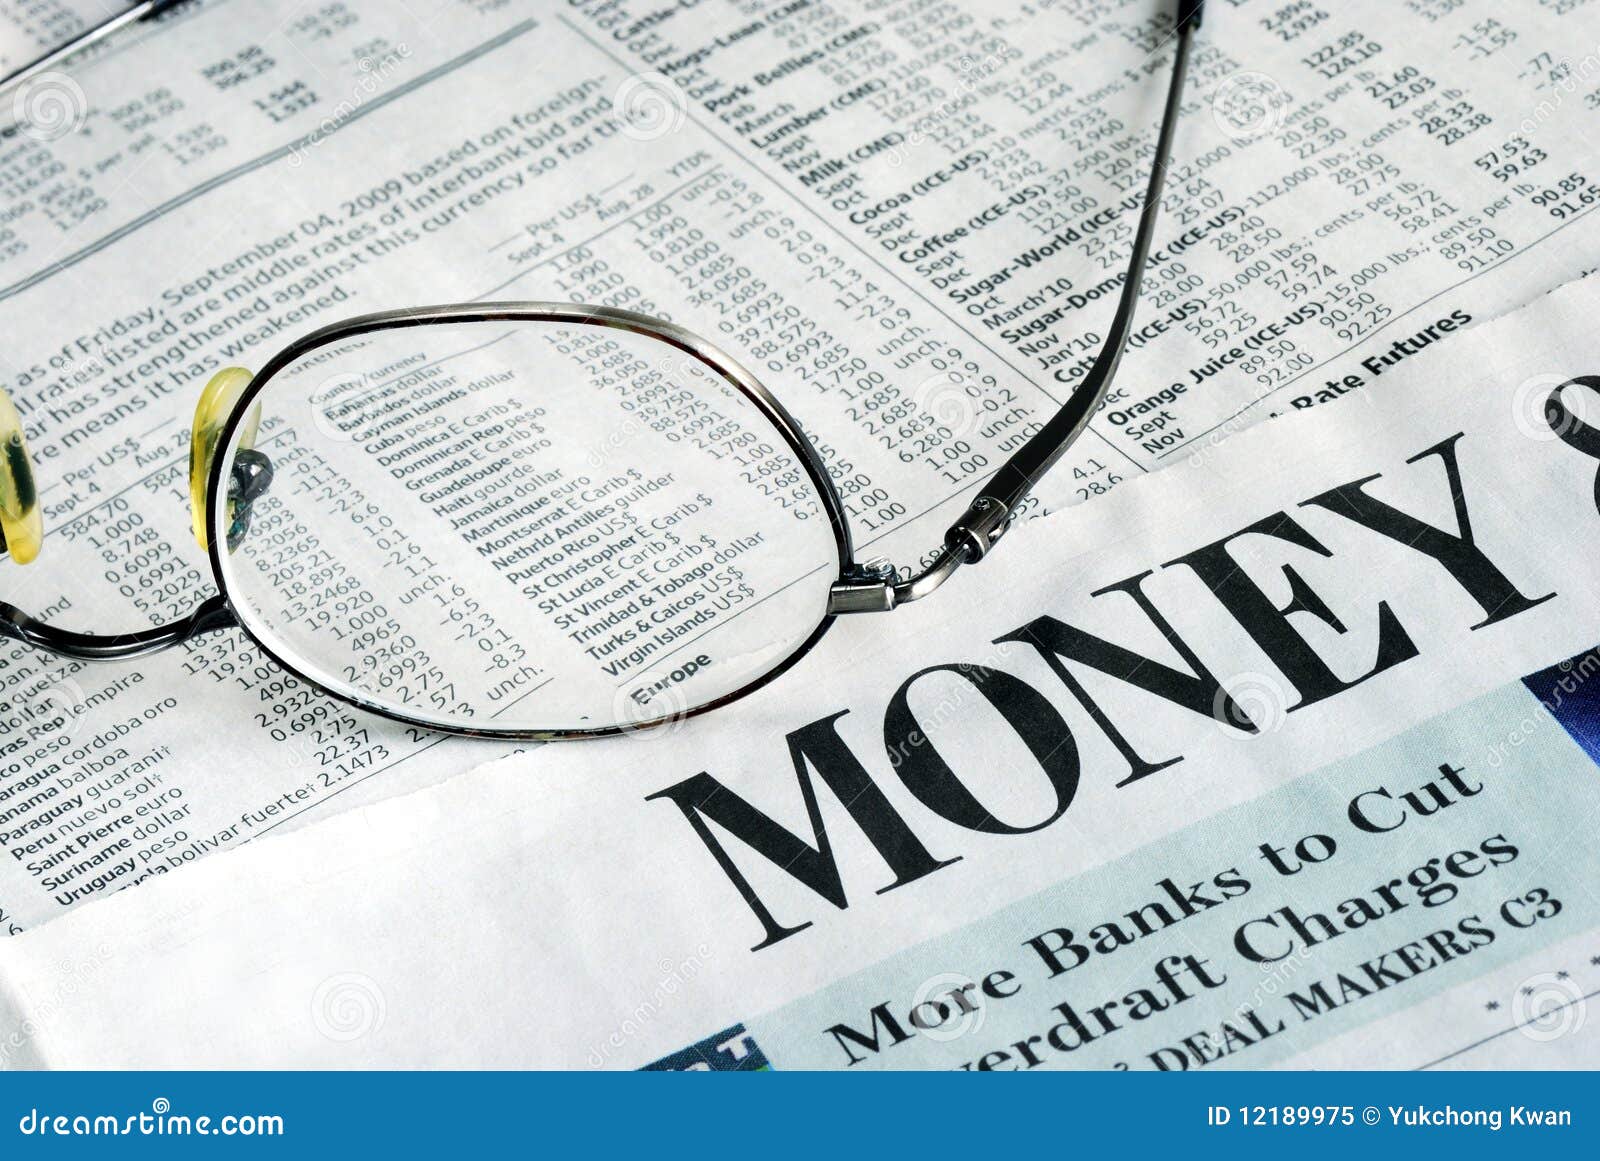 focus on money investing from a newspaper